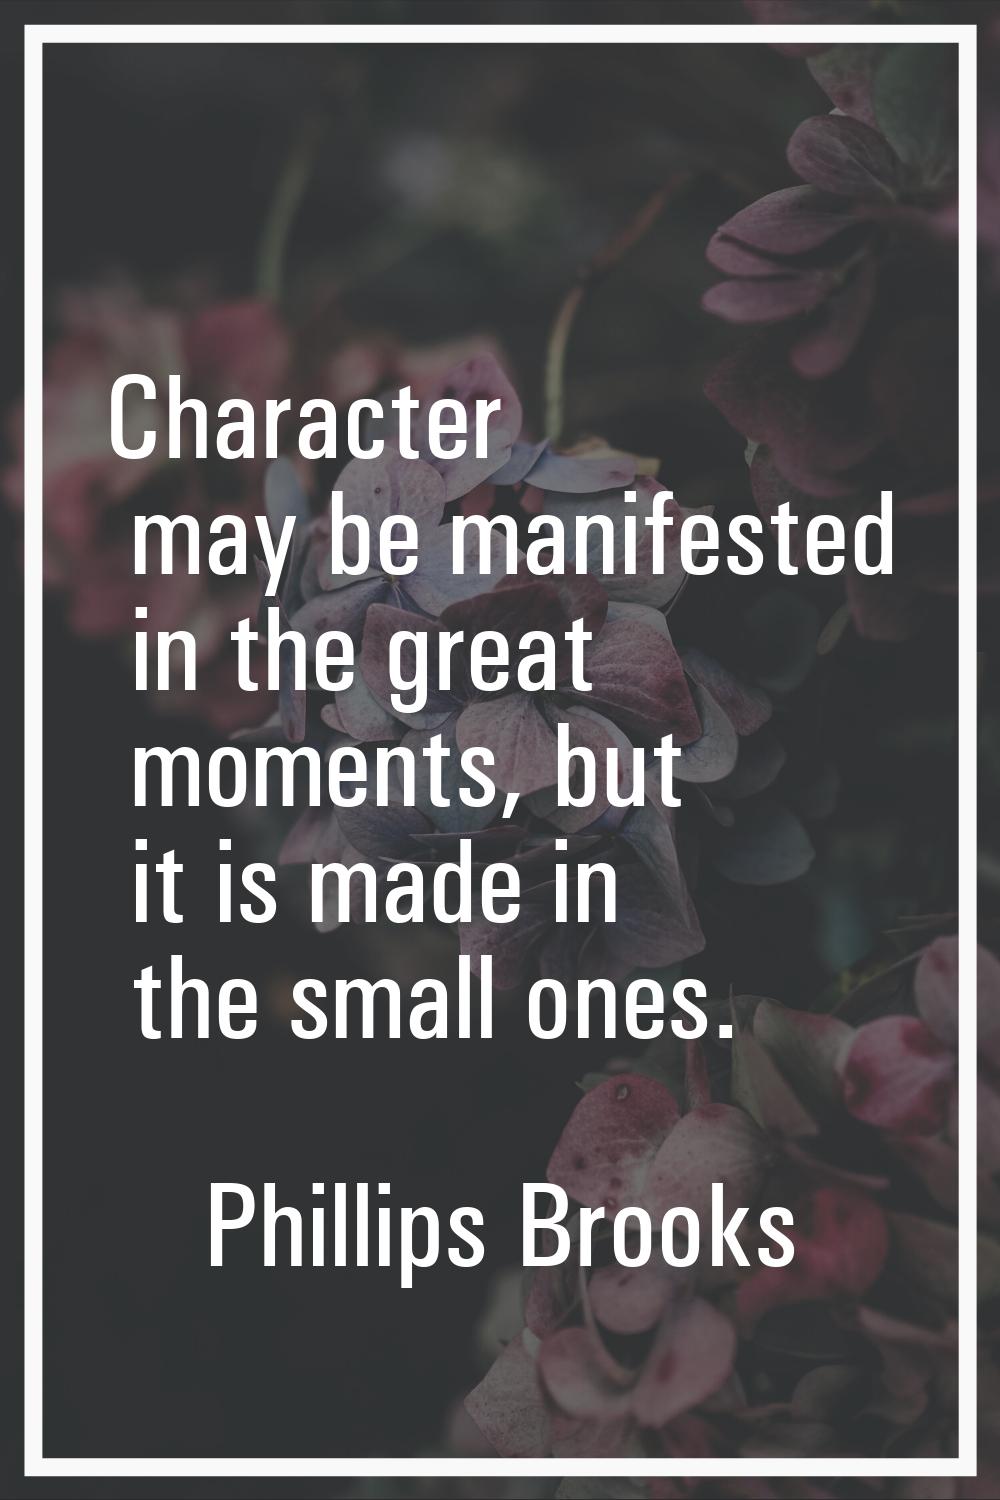 Character may be manifested in the great moments, but it is made in the small ones.